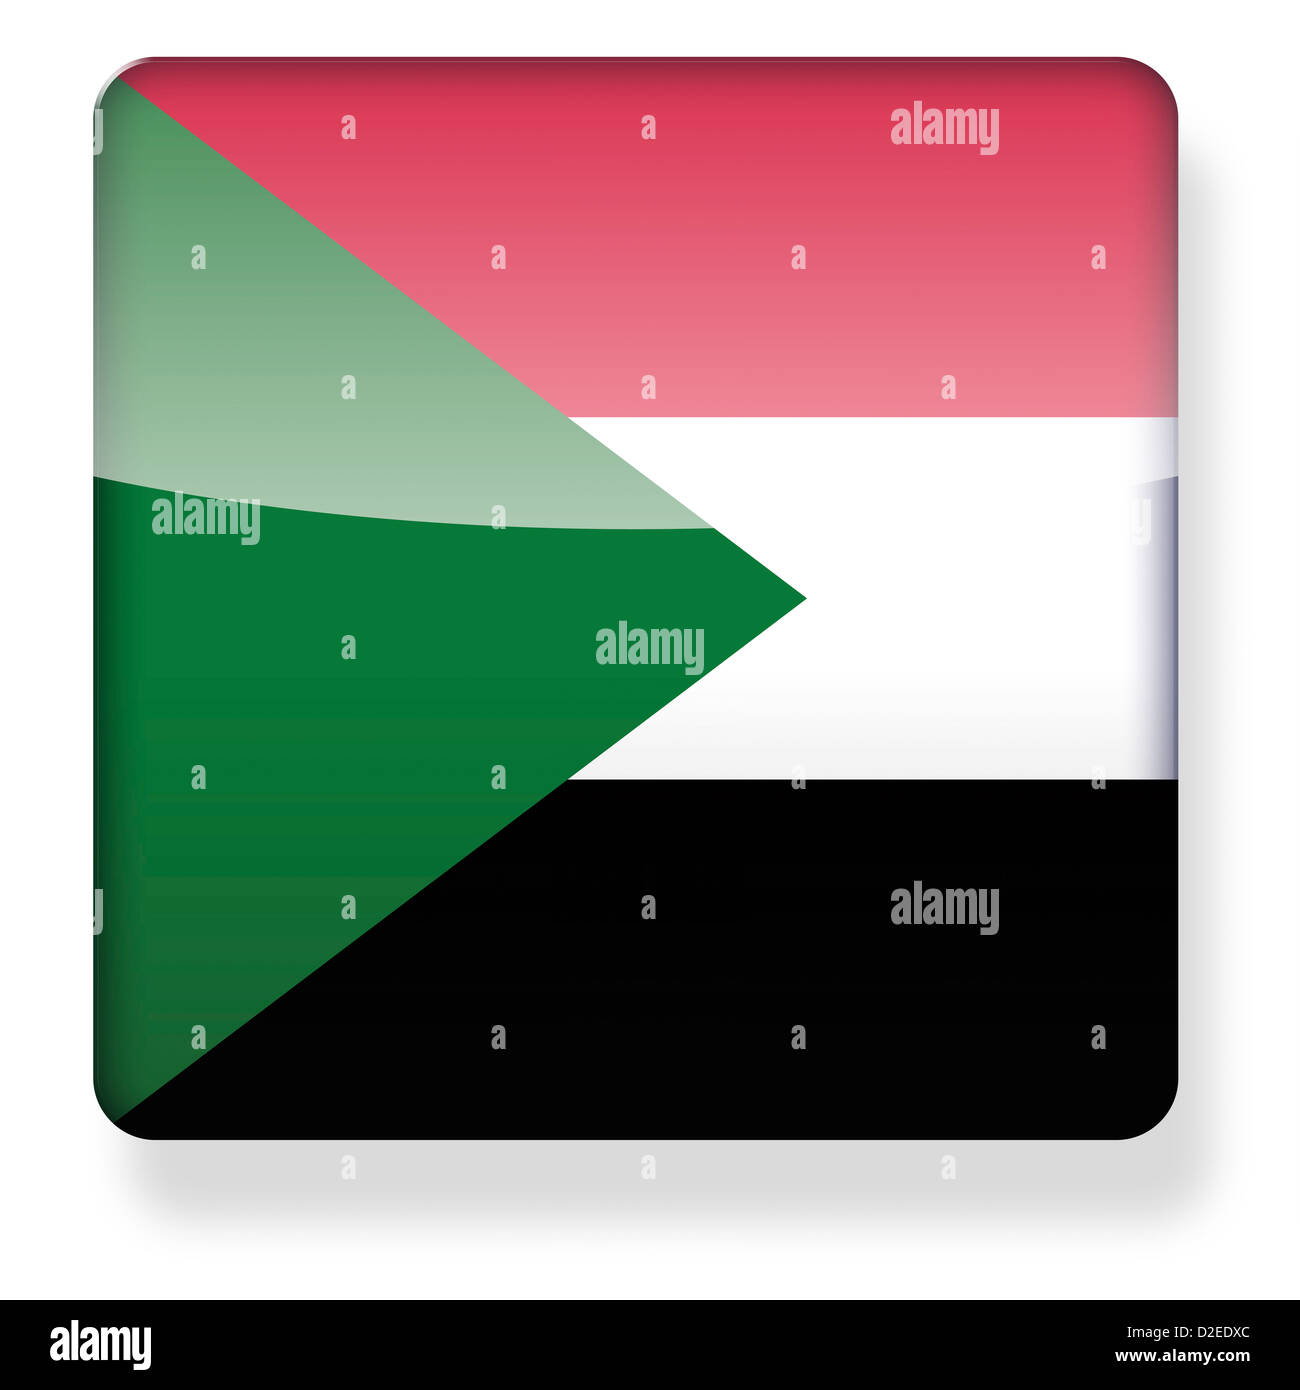 Sudan flag as an app icon. Clipping path included. Stock Photo